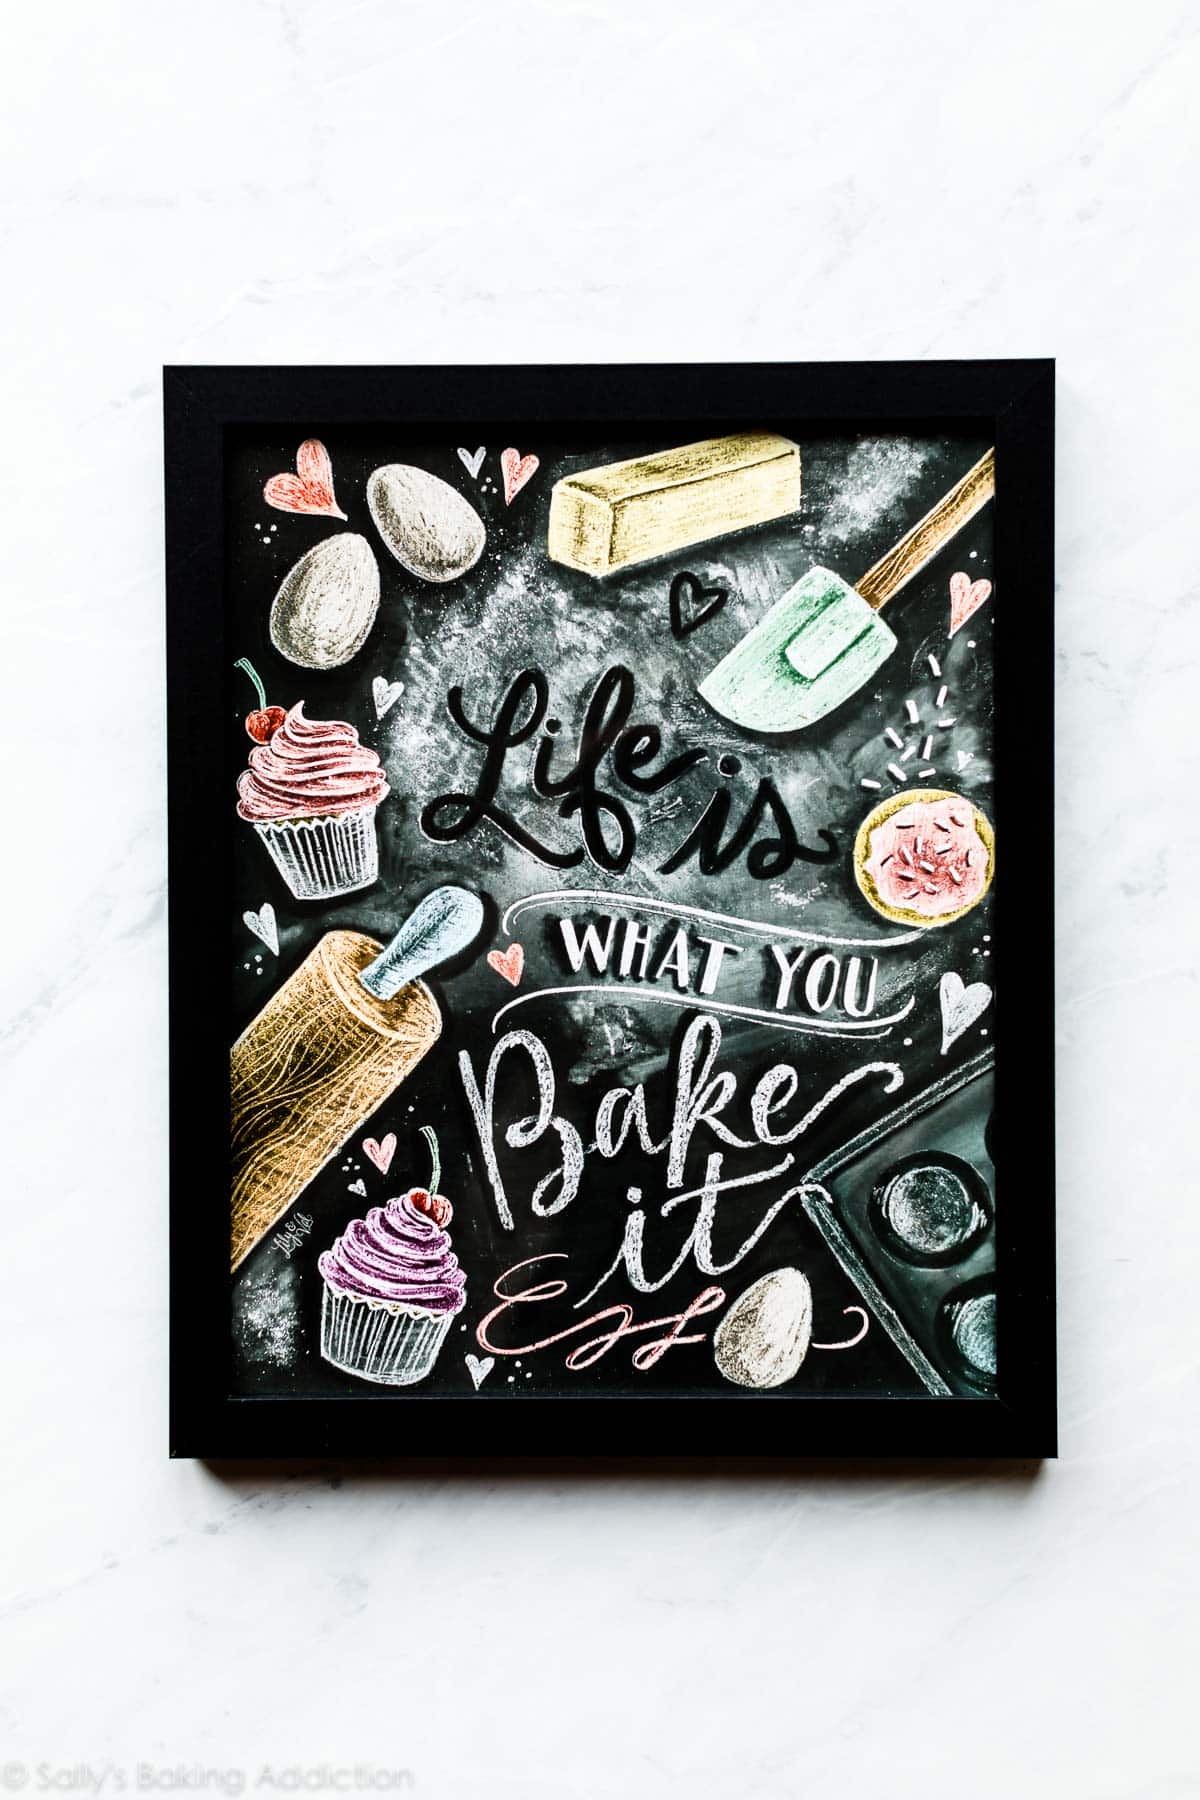 Life is what you bake it art print in a black frame